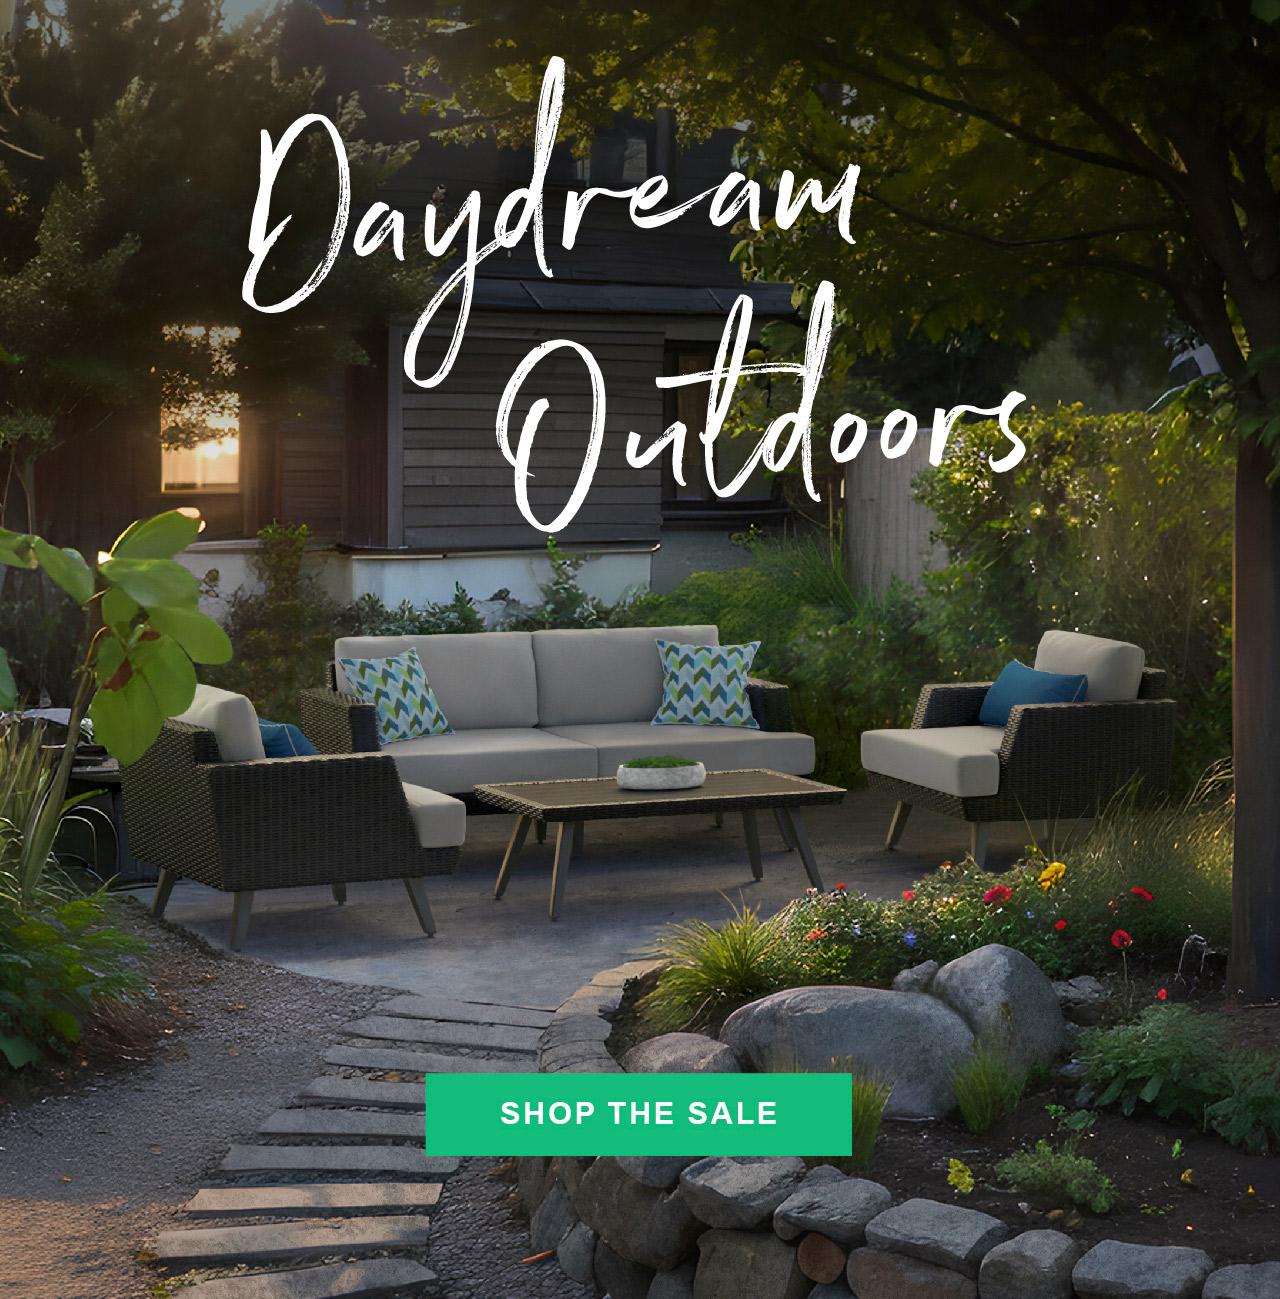 Start your outdoor daydream, shop the latest sale